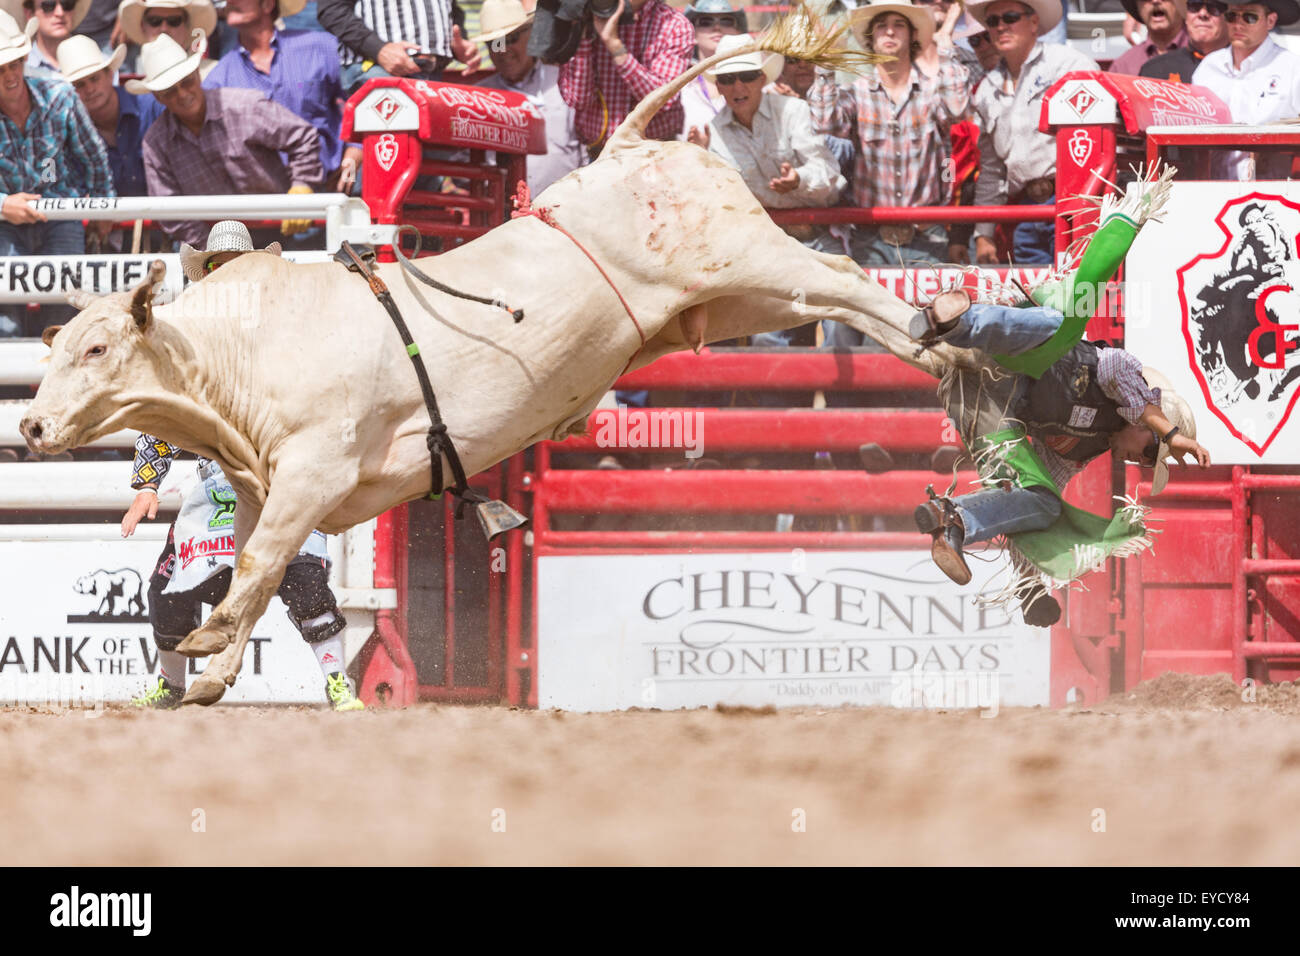 Cheyenne, Wyoming, USA. 26th July, 2015. Bull rider Aaron Pass is tossed from his bull after completing his ride during the Bull Riding finals at the Cheyenne Frontier Days rodeo in Frontier Park Arena July 26, 2015 in Cheyenne, Wyoming. Pass went on to win the Bull Riding Championship. Stock Photo